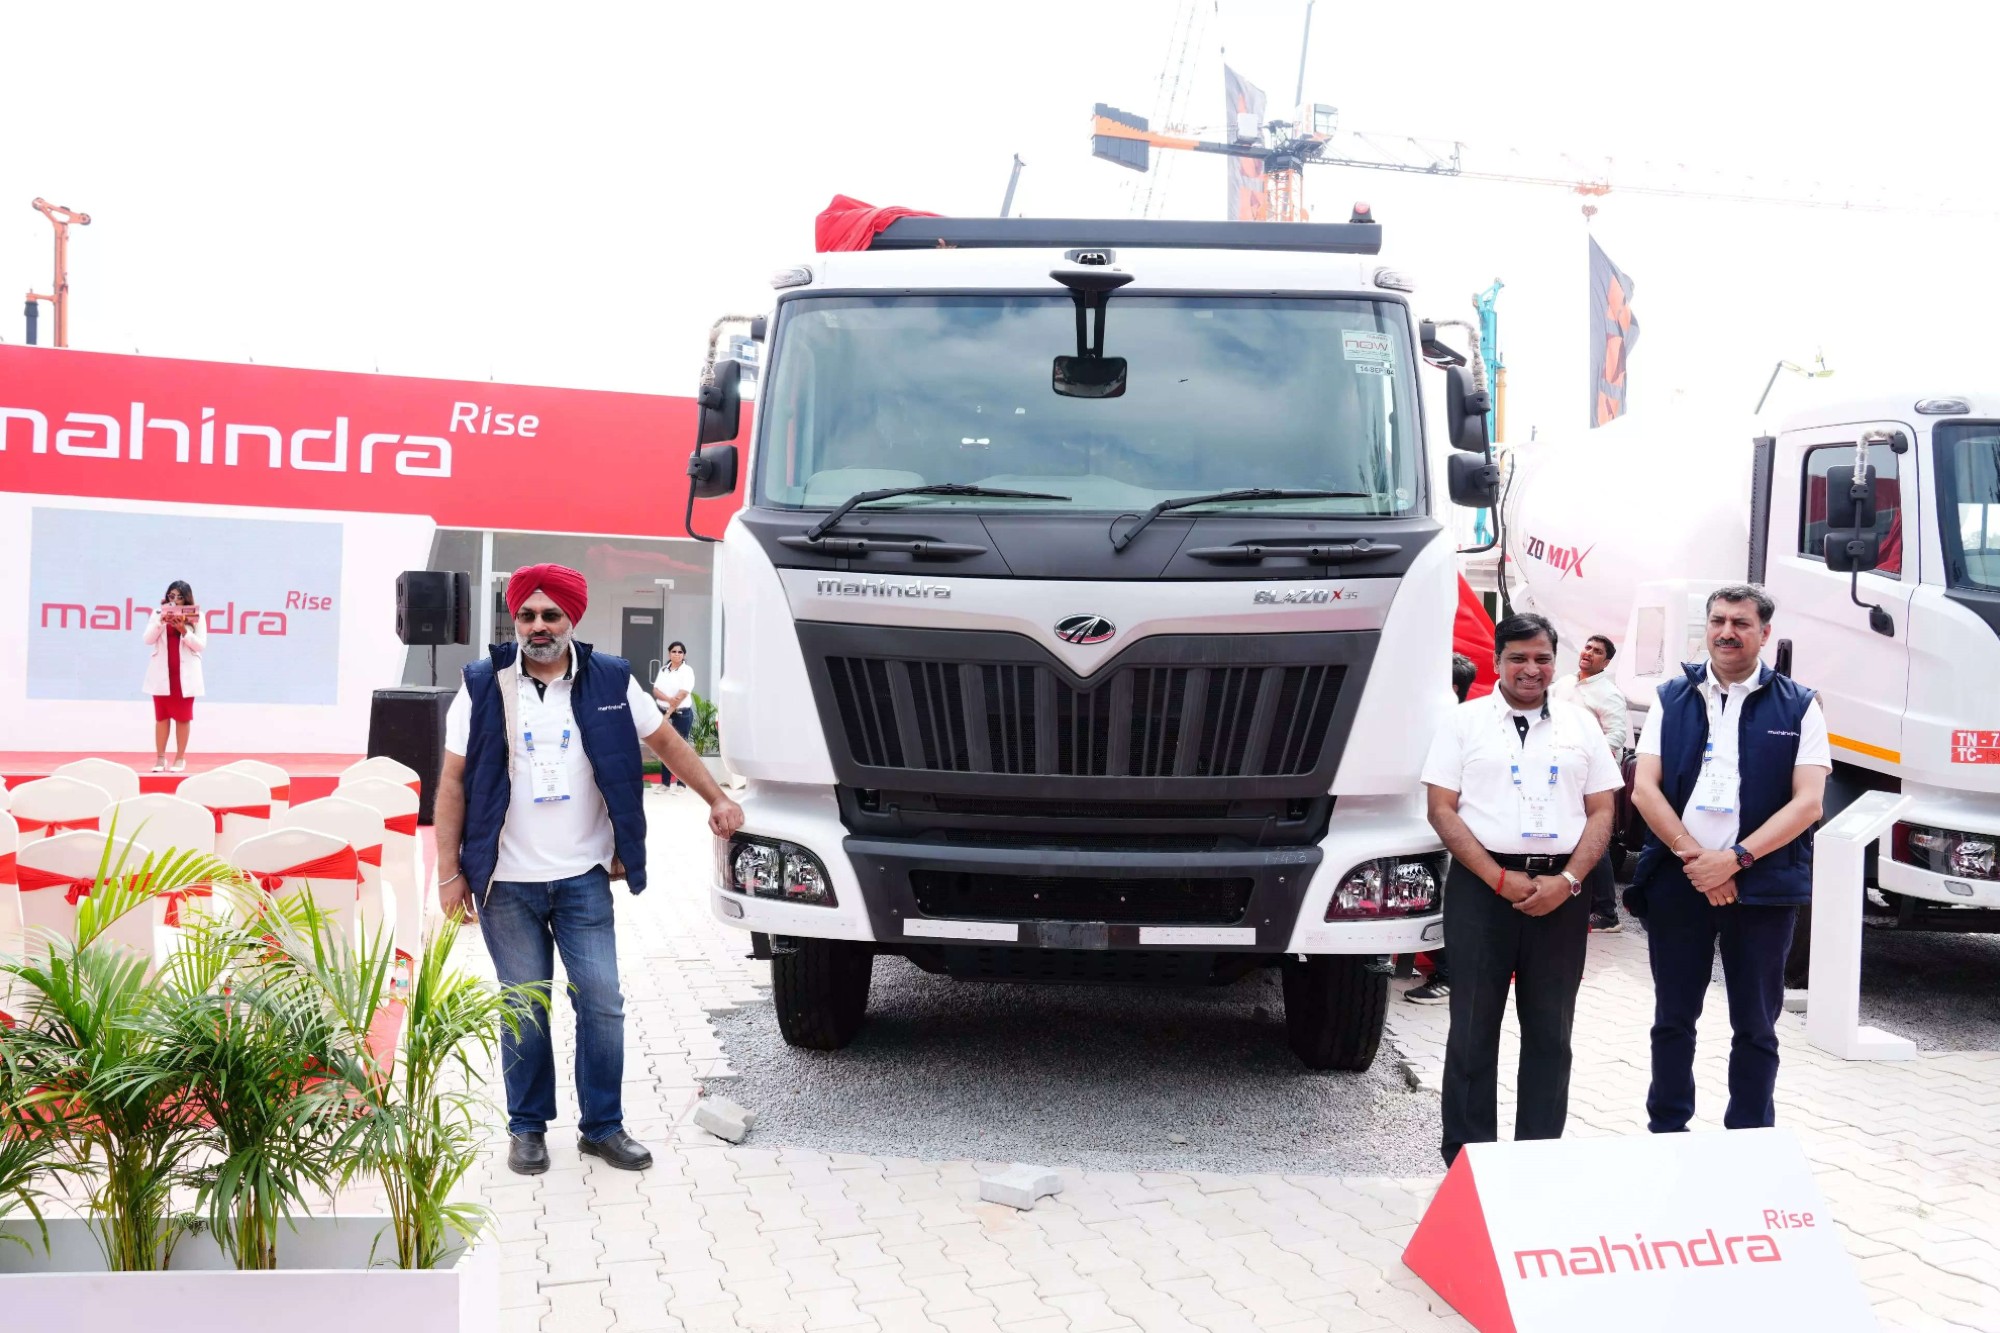 Mahindra's Truck and Bus Division (MTBD) and Construction Equipment Division (MCE) made a noteworthy impact at EXCON 2023, unveiling their latest offerings designed to redefine industry standards in innovation and reliability.